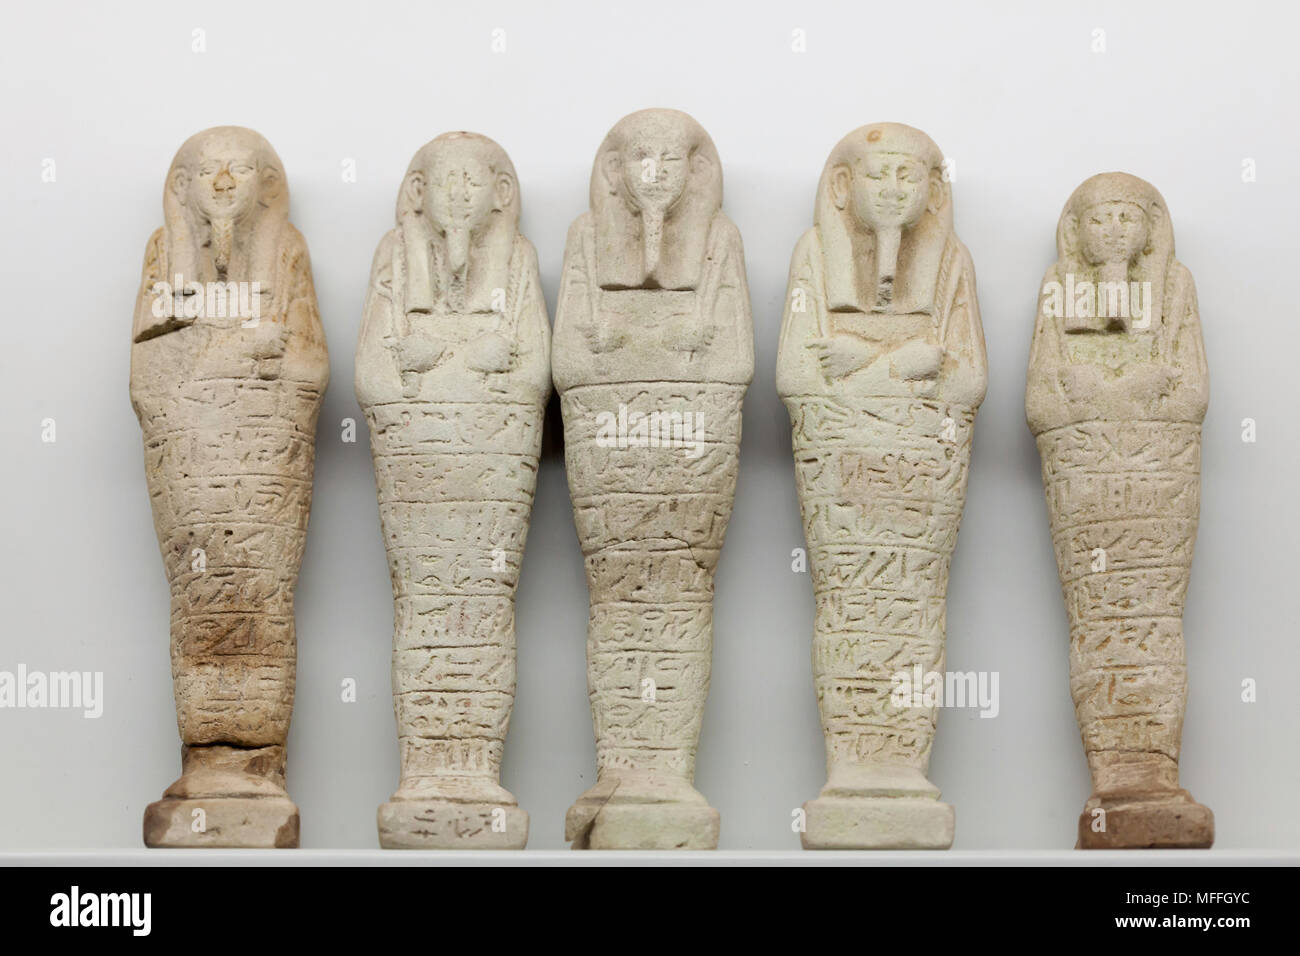 Ancient Egyptian ushabtis (funerary statuettes) of Herudja, son of Paunhatef, dated from the 26th Dynasty (664-525 BC) on display in the National Archaeological Museum (Museo Archeologico Nazionale di Napoli) in Naples, Campania, Italy. Stock Photo